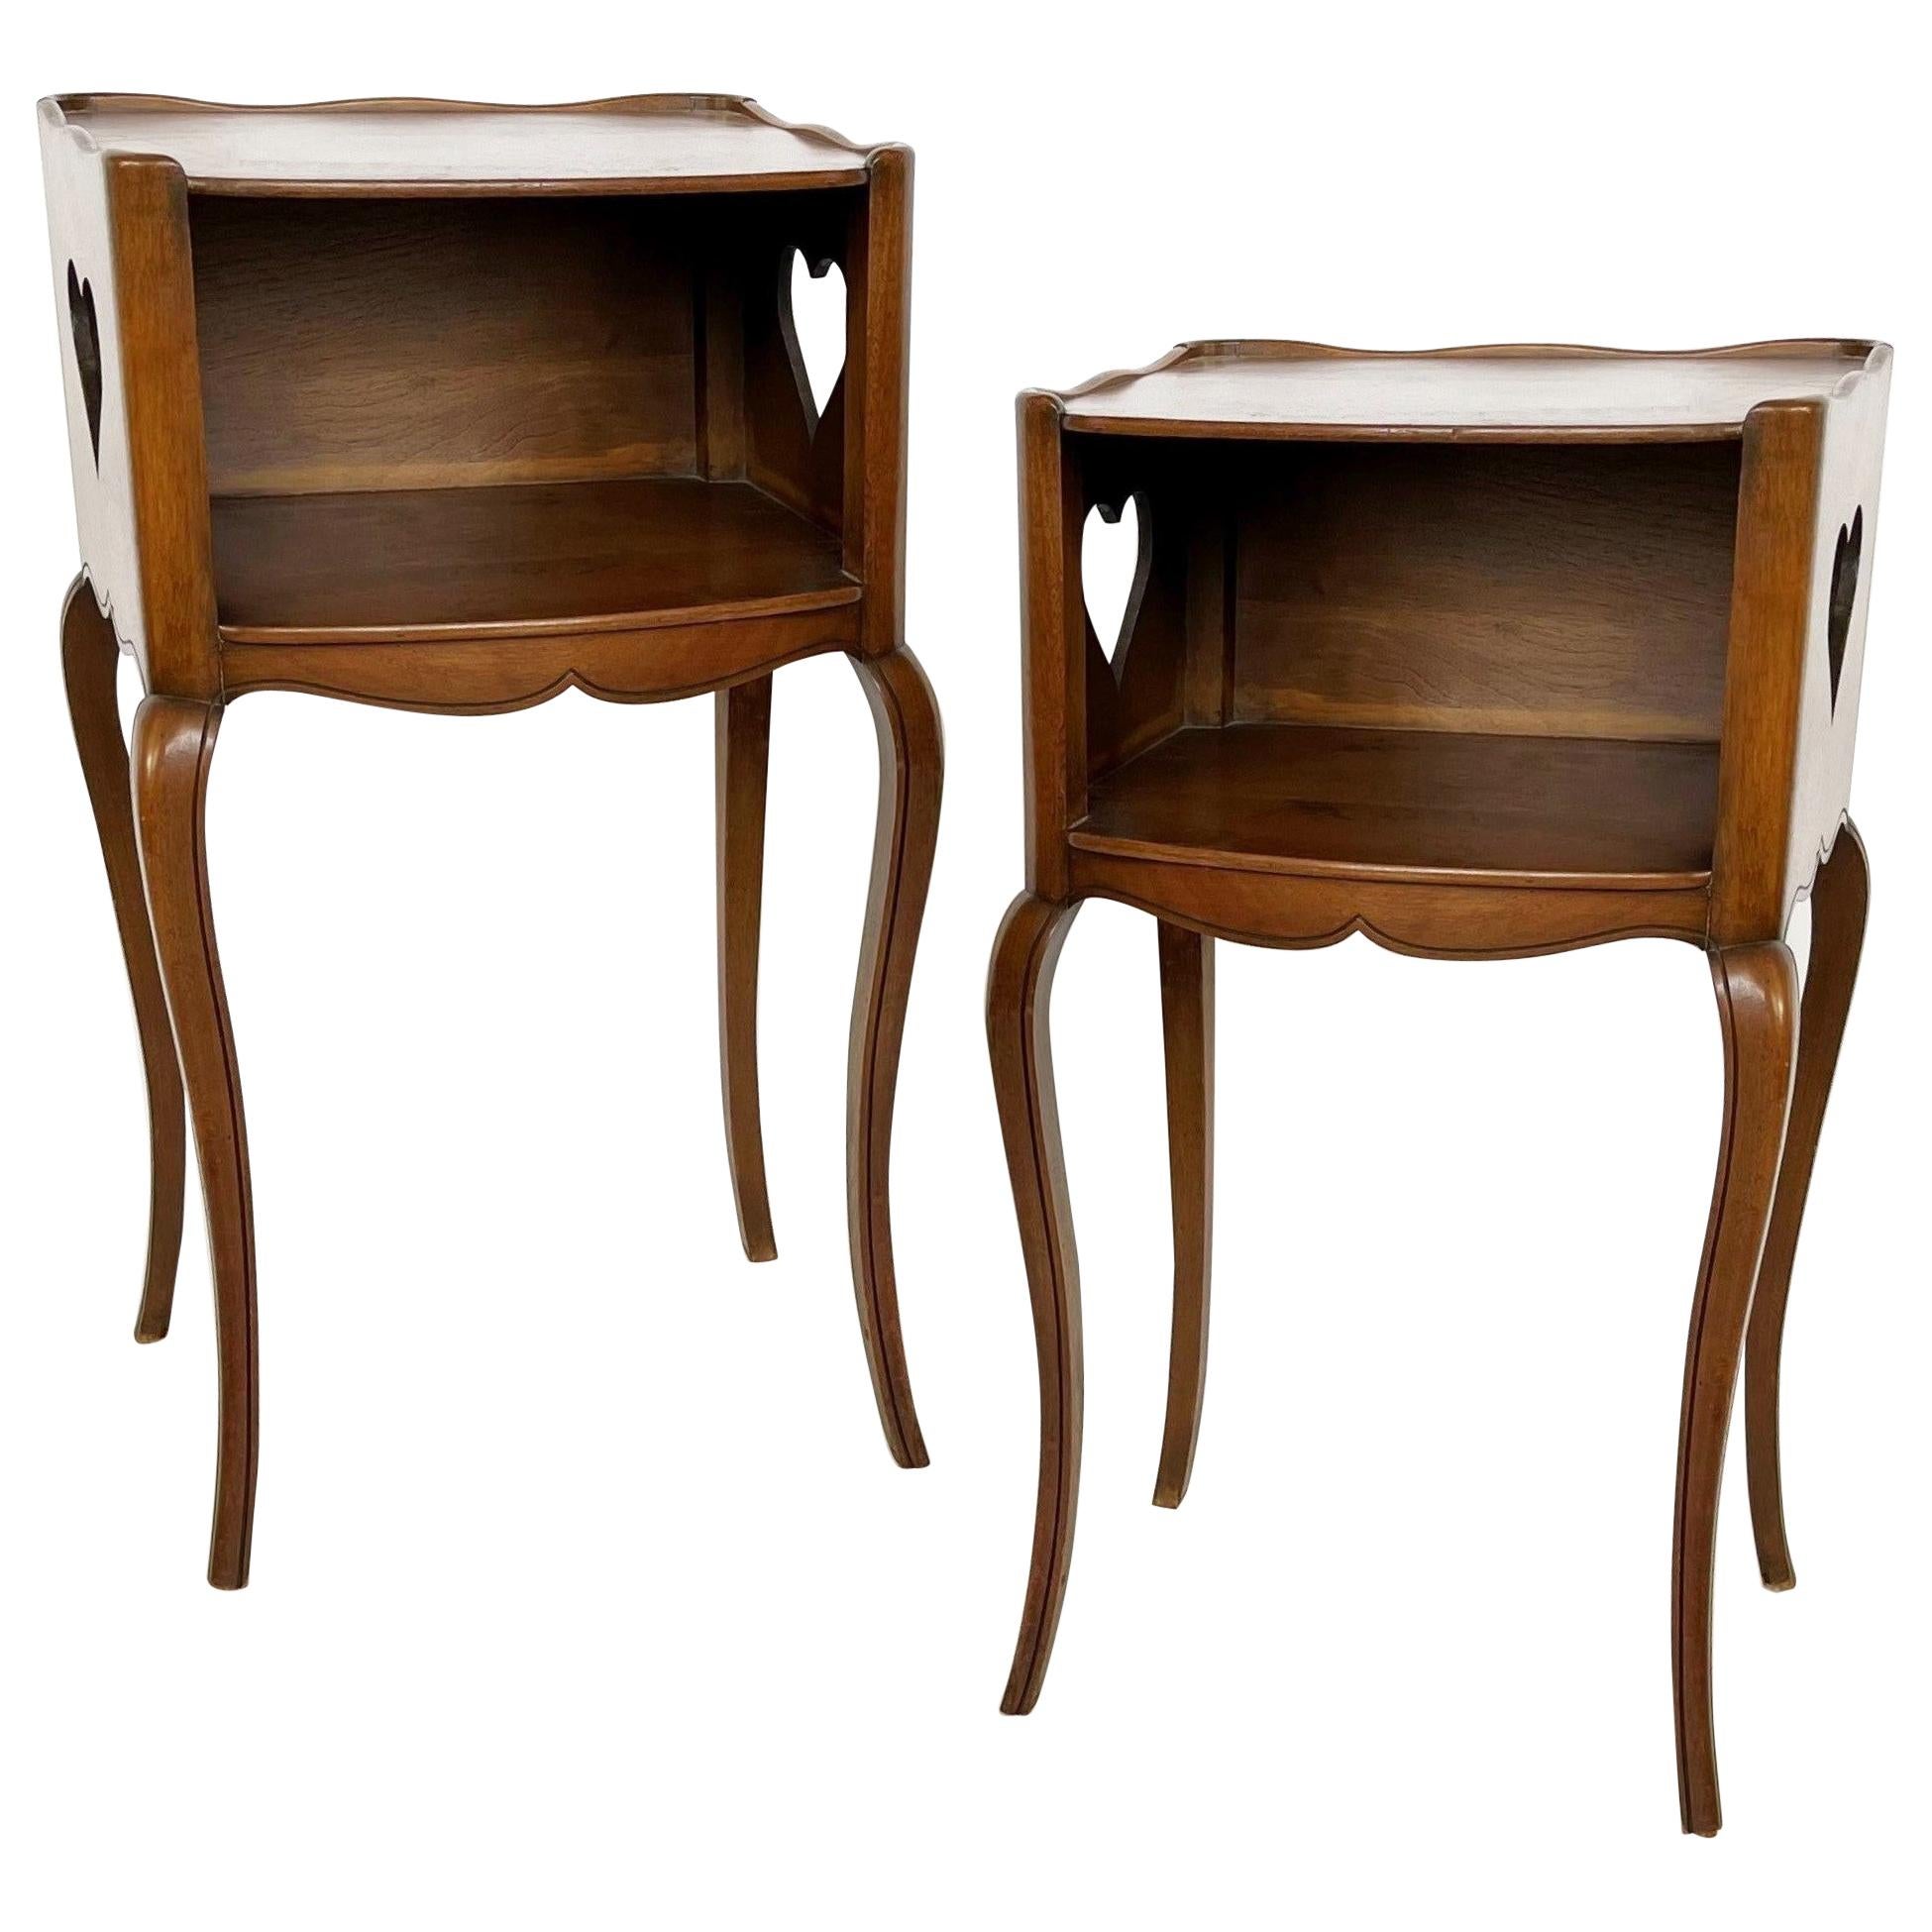 Early 20th Century Pair of French Louis XV Style Commodes/Nightstands